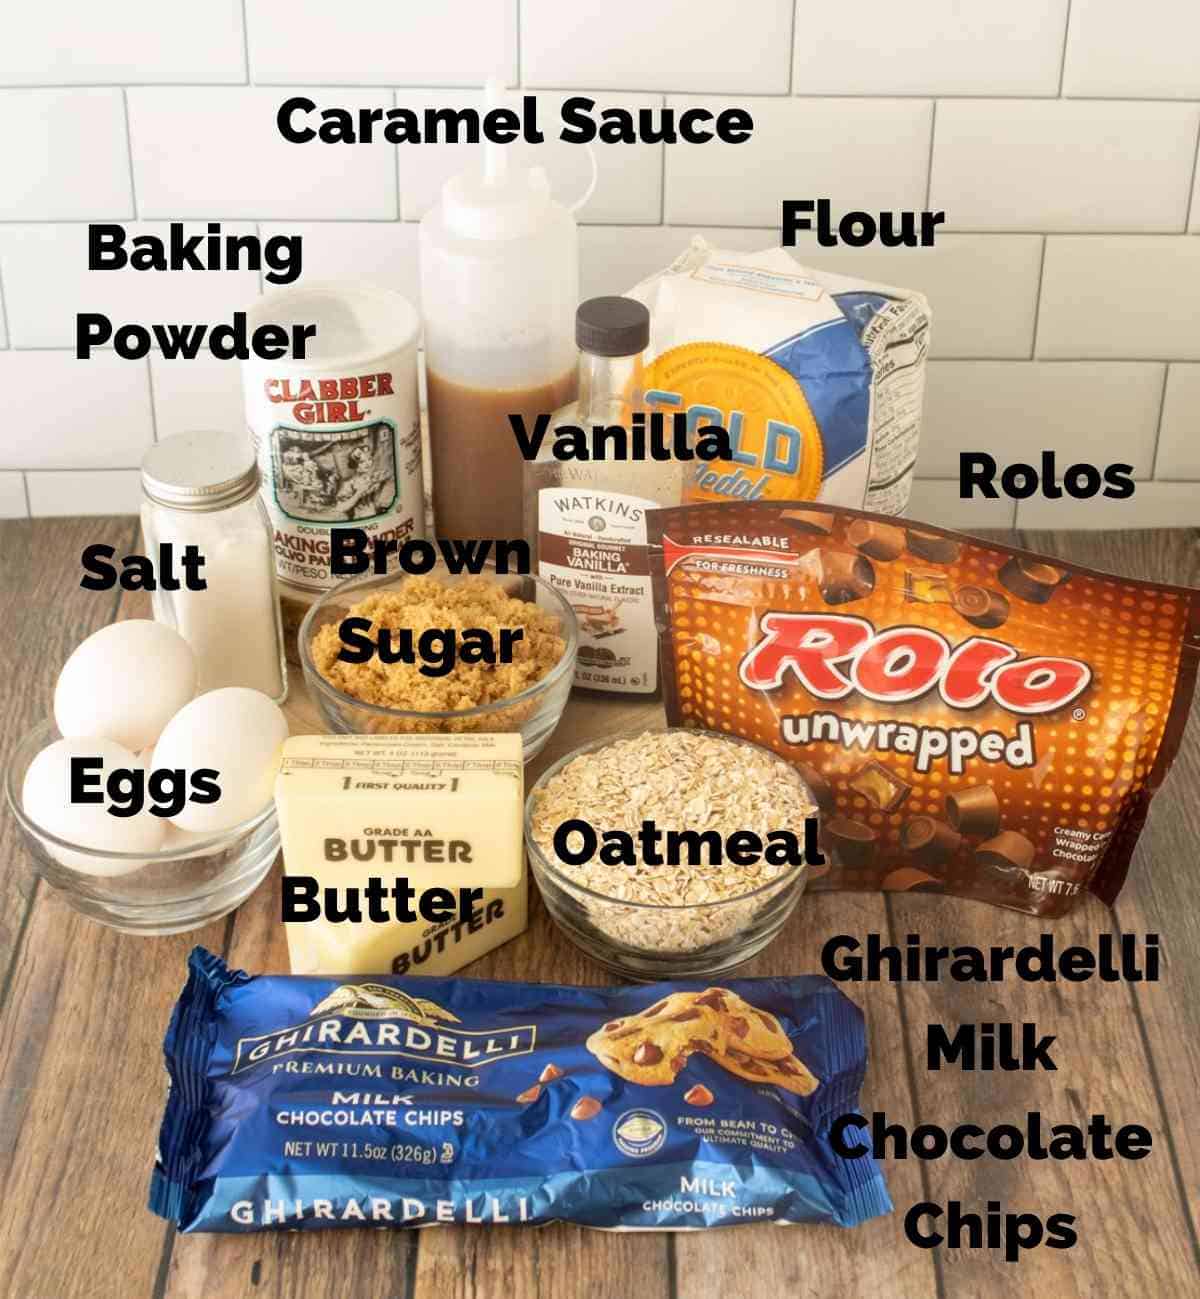 Ingredients to make Crumbl Oatmeal Rolo Cookies